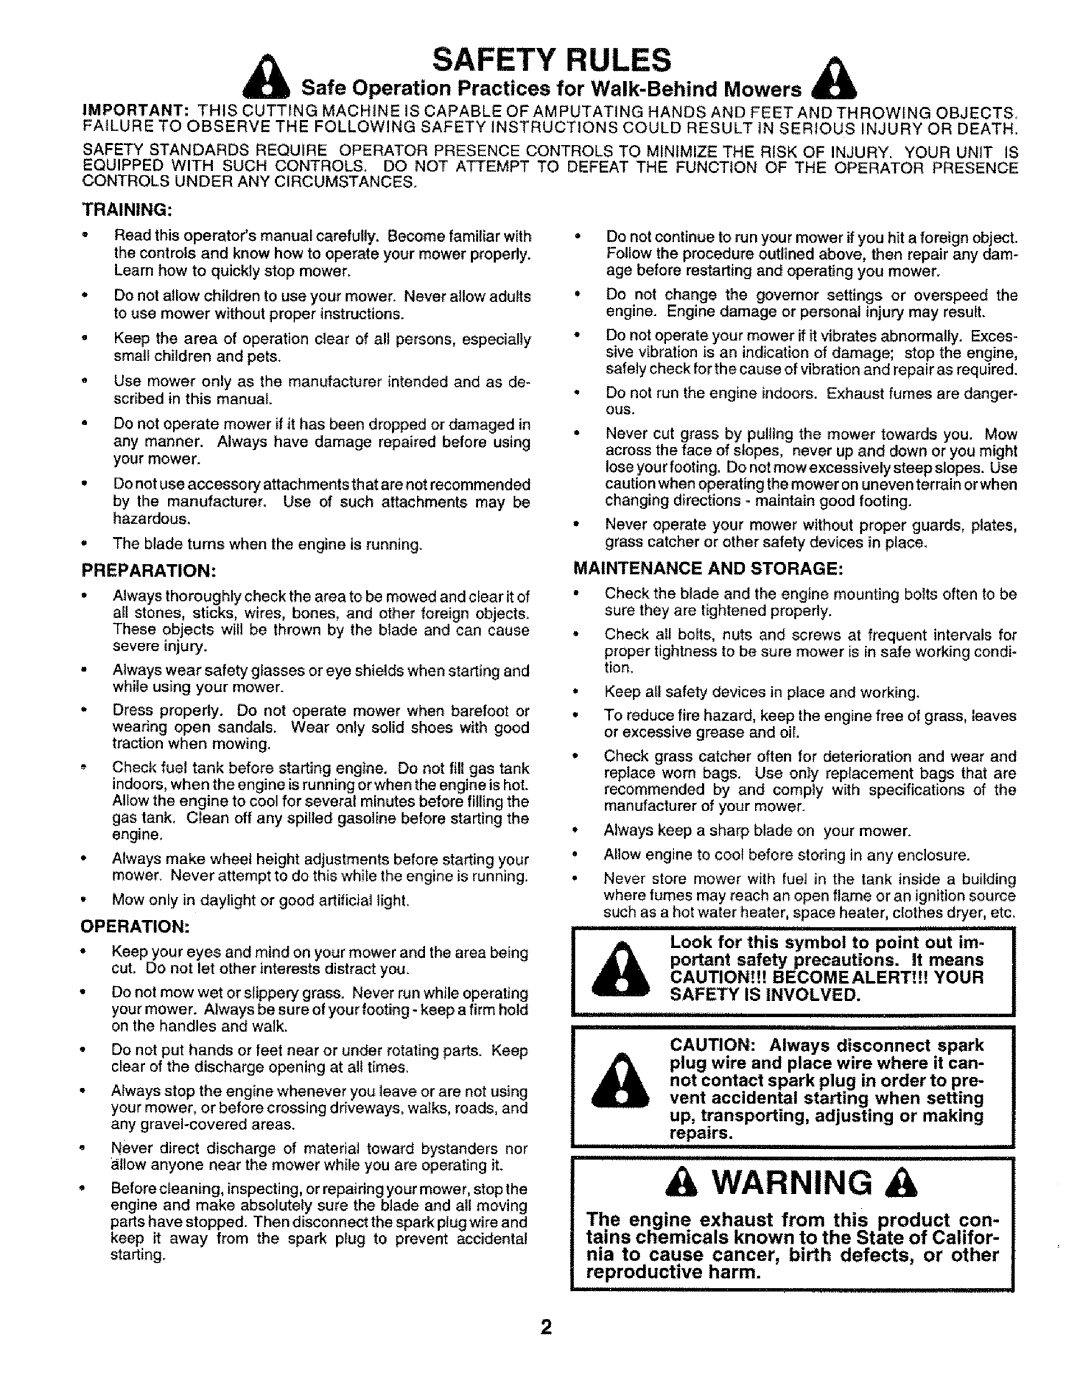 Craftsman 917.3773 manual Safety Rules, A Warning A, Safe Operation Practices for Walk-BehindMowers, Training, Preparation 